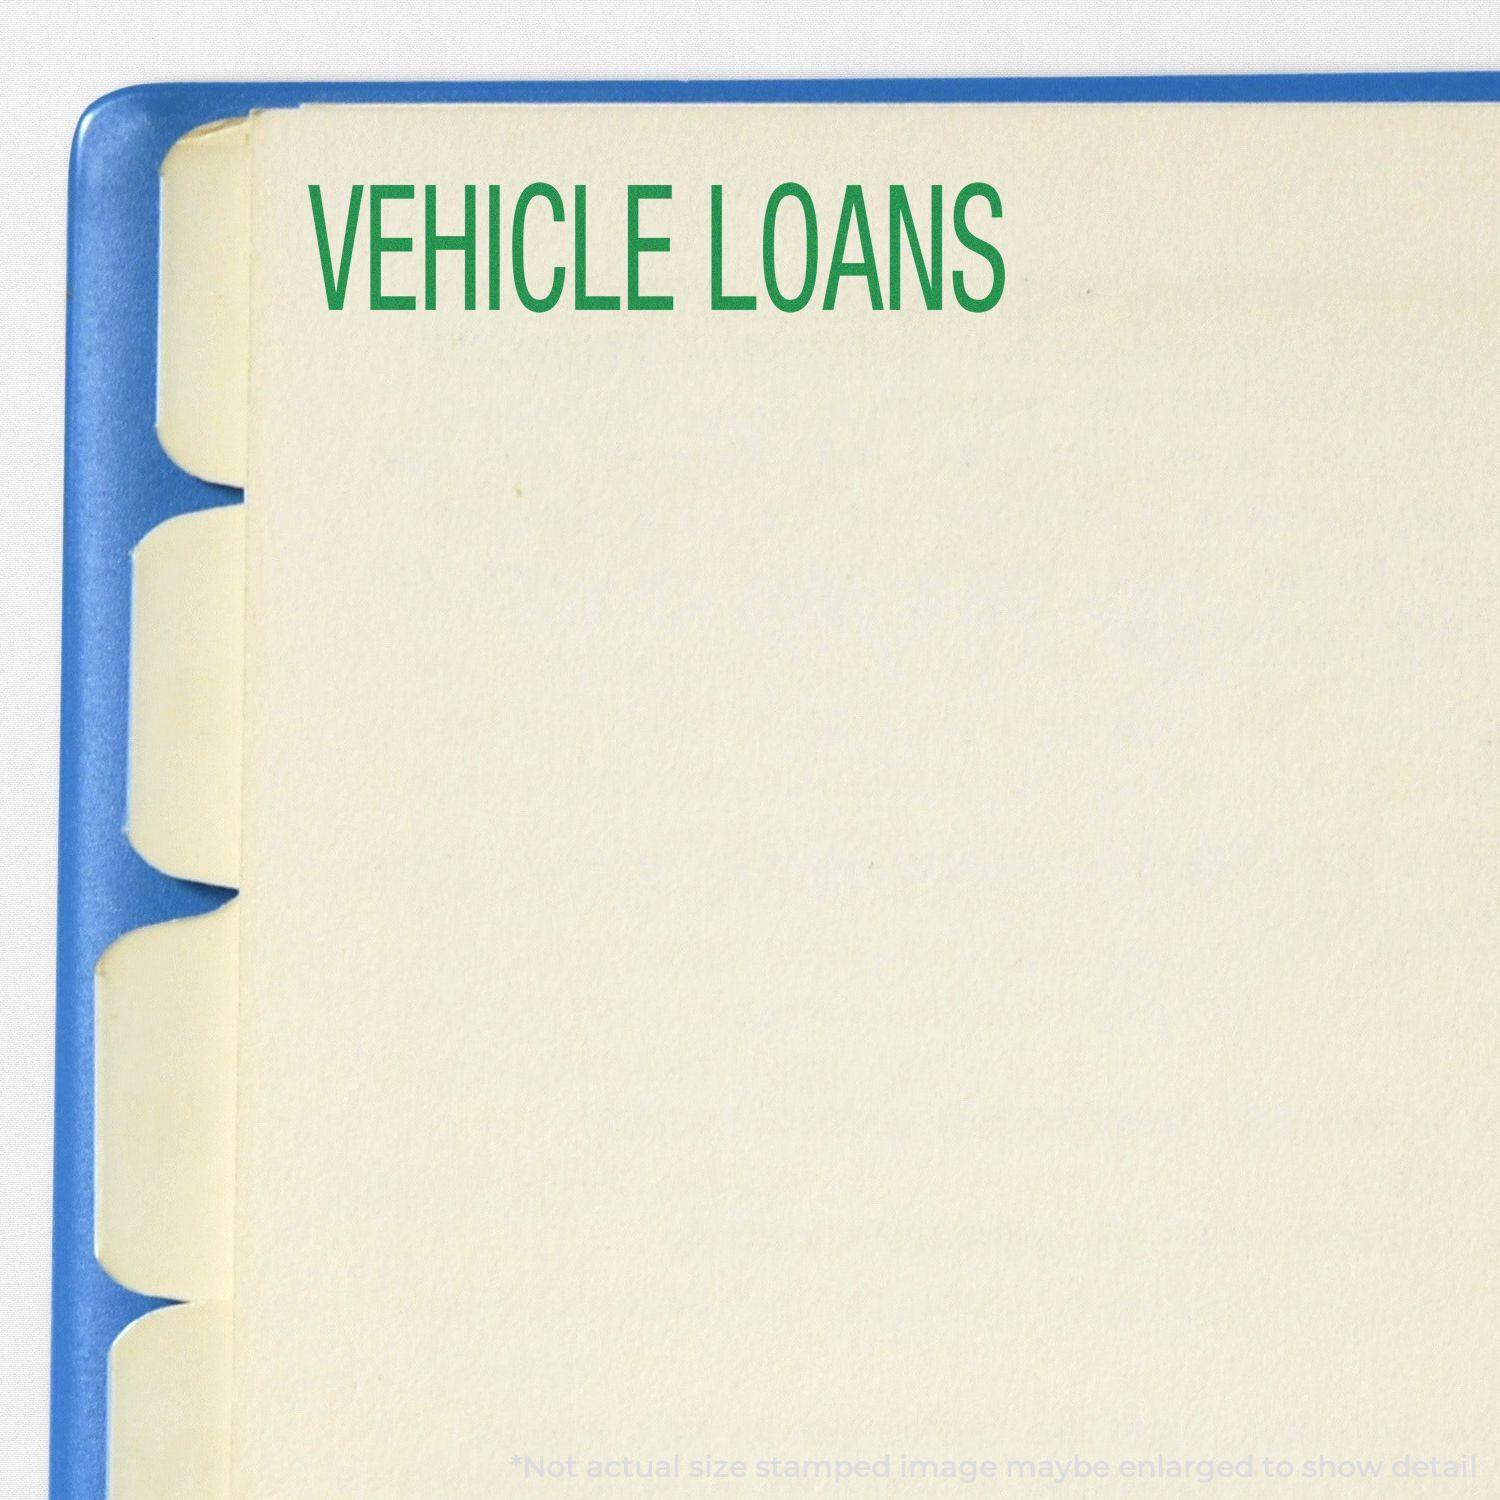 A stock office rubber stamp with a stamped image showing how the text "VEHICLE LOANS" is displayed after stamping.